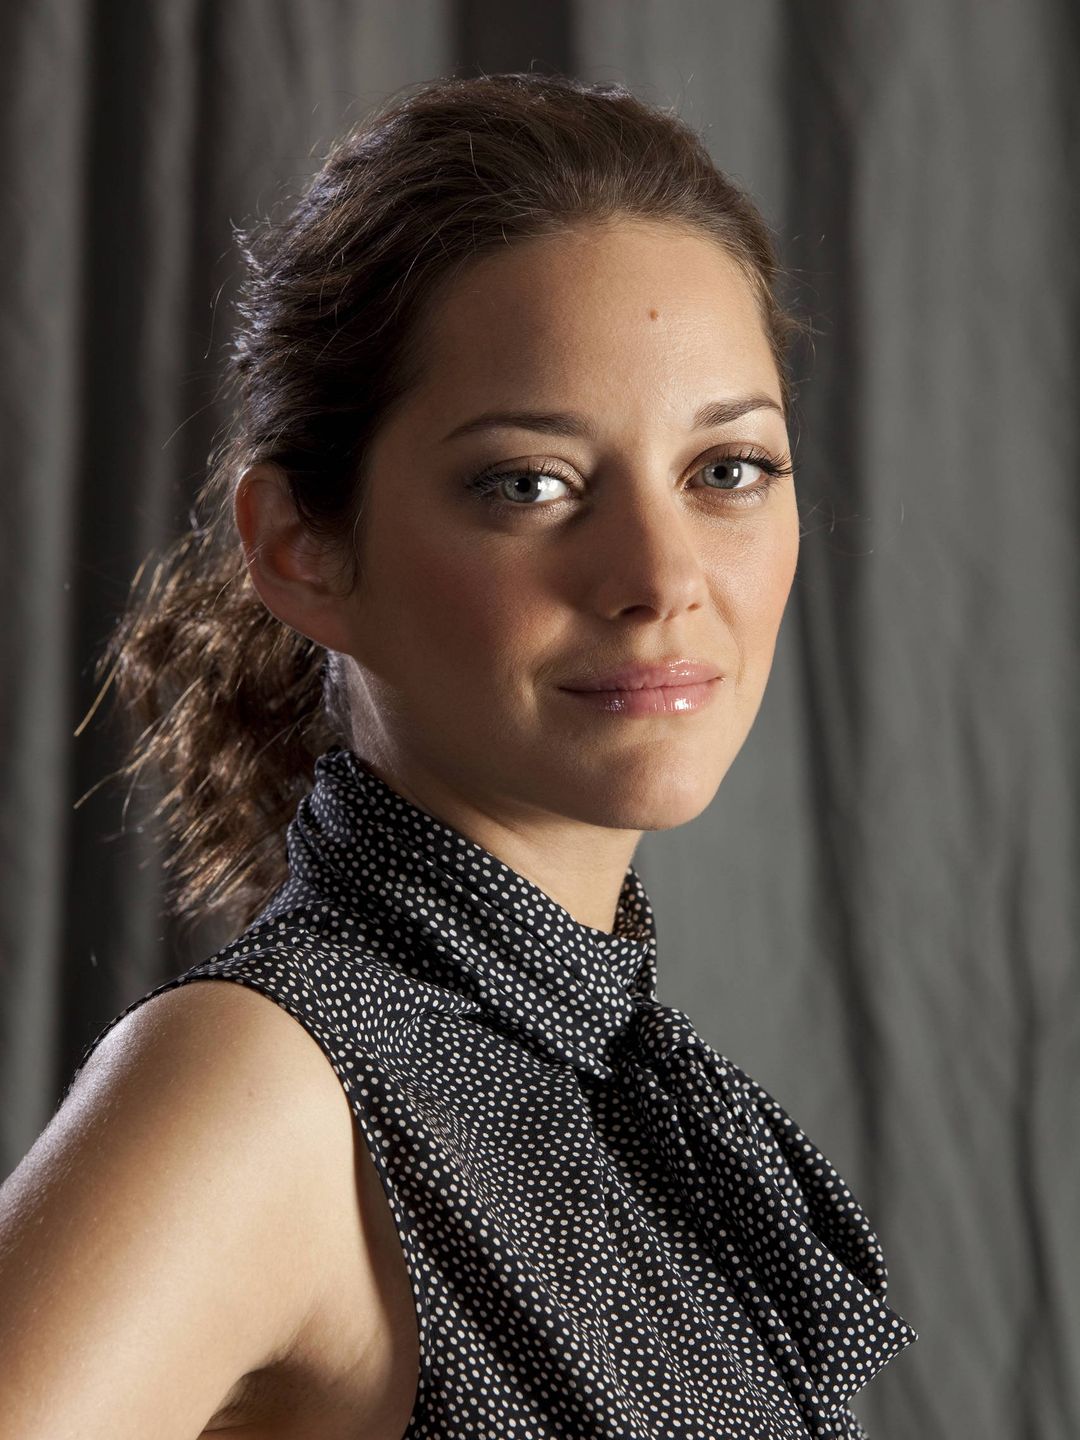 Marion Cotillard who is her mother